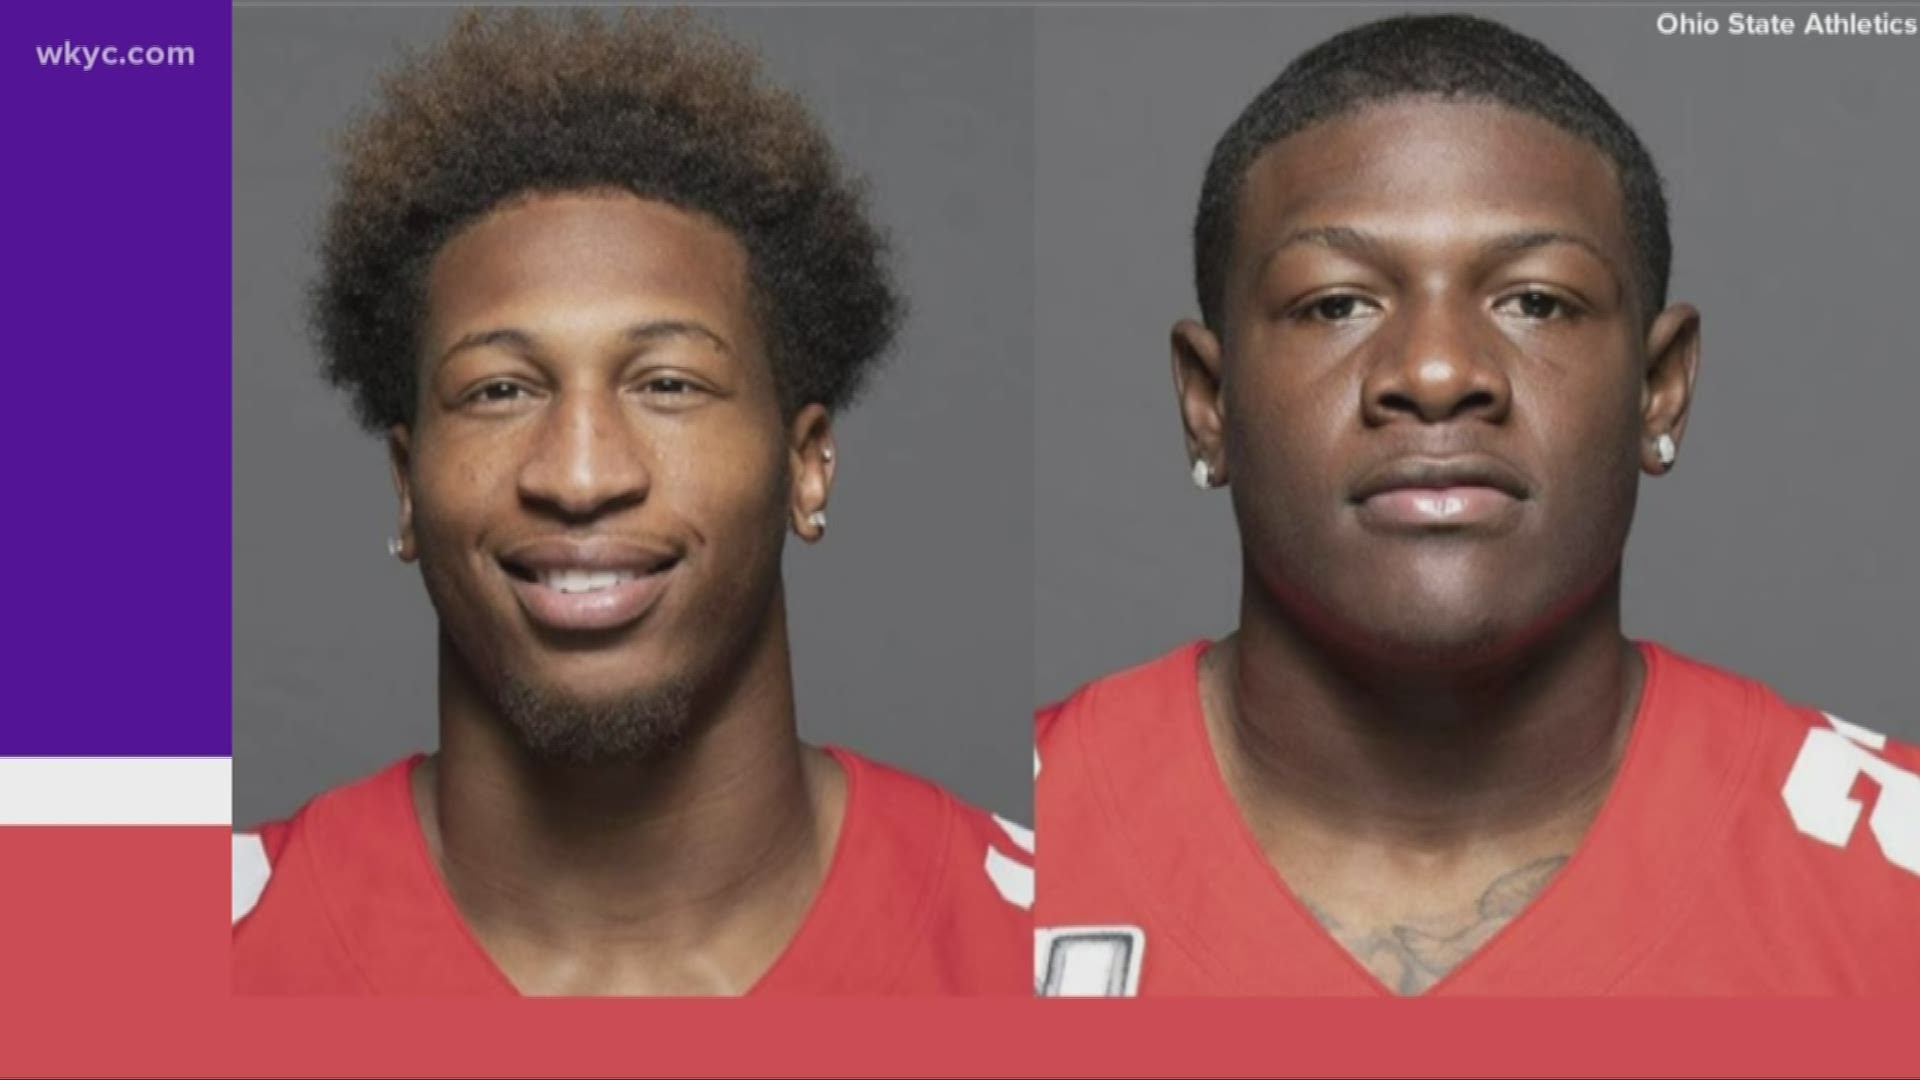 Kedinap Sex Rep Videos - Former Ohio State football players indicted for rape and kidnapping | wkyc. com